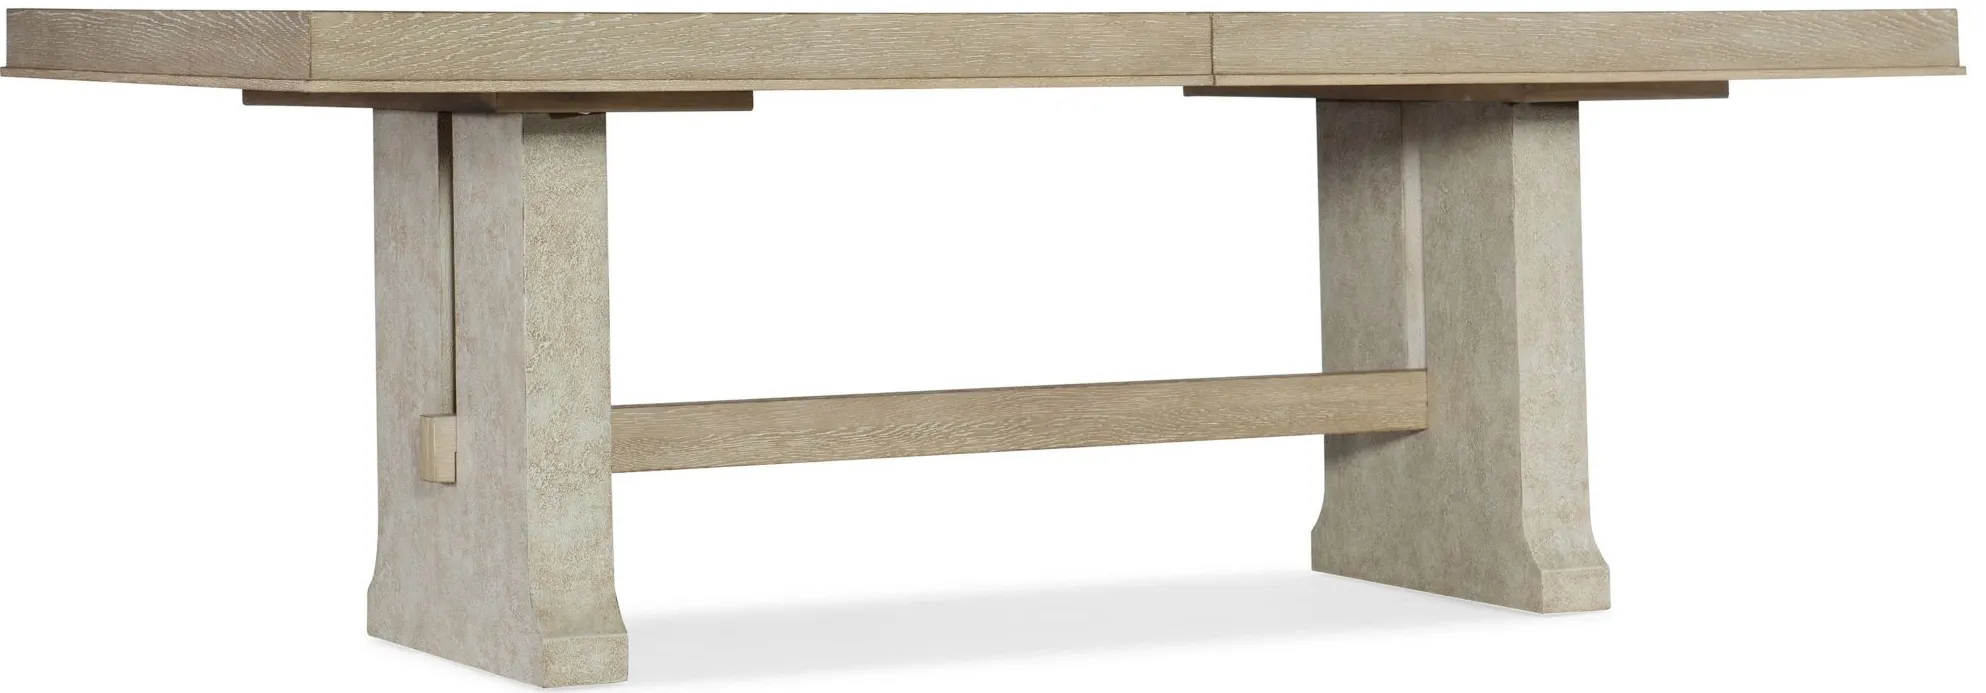 Cascade Rectangular Dining Table with Leaf in Terrain by Hooker Furniture